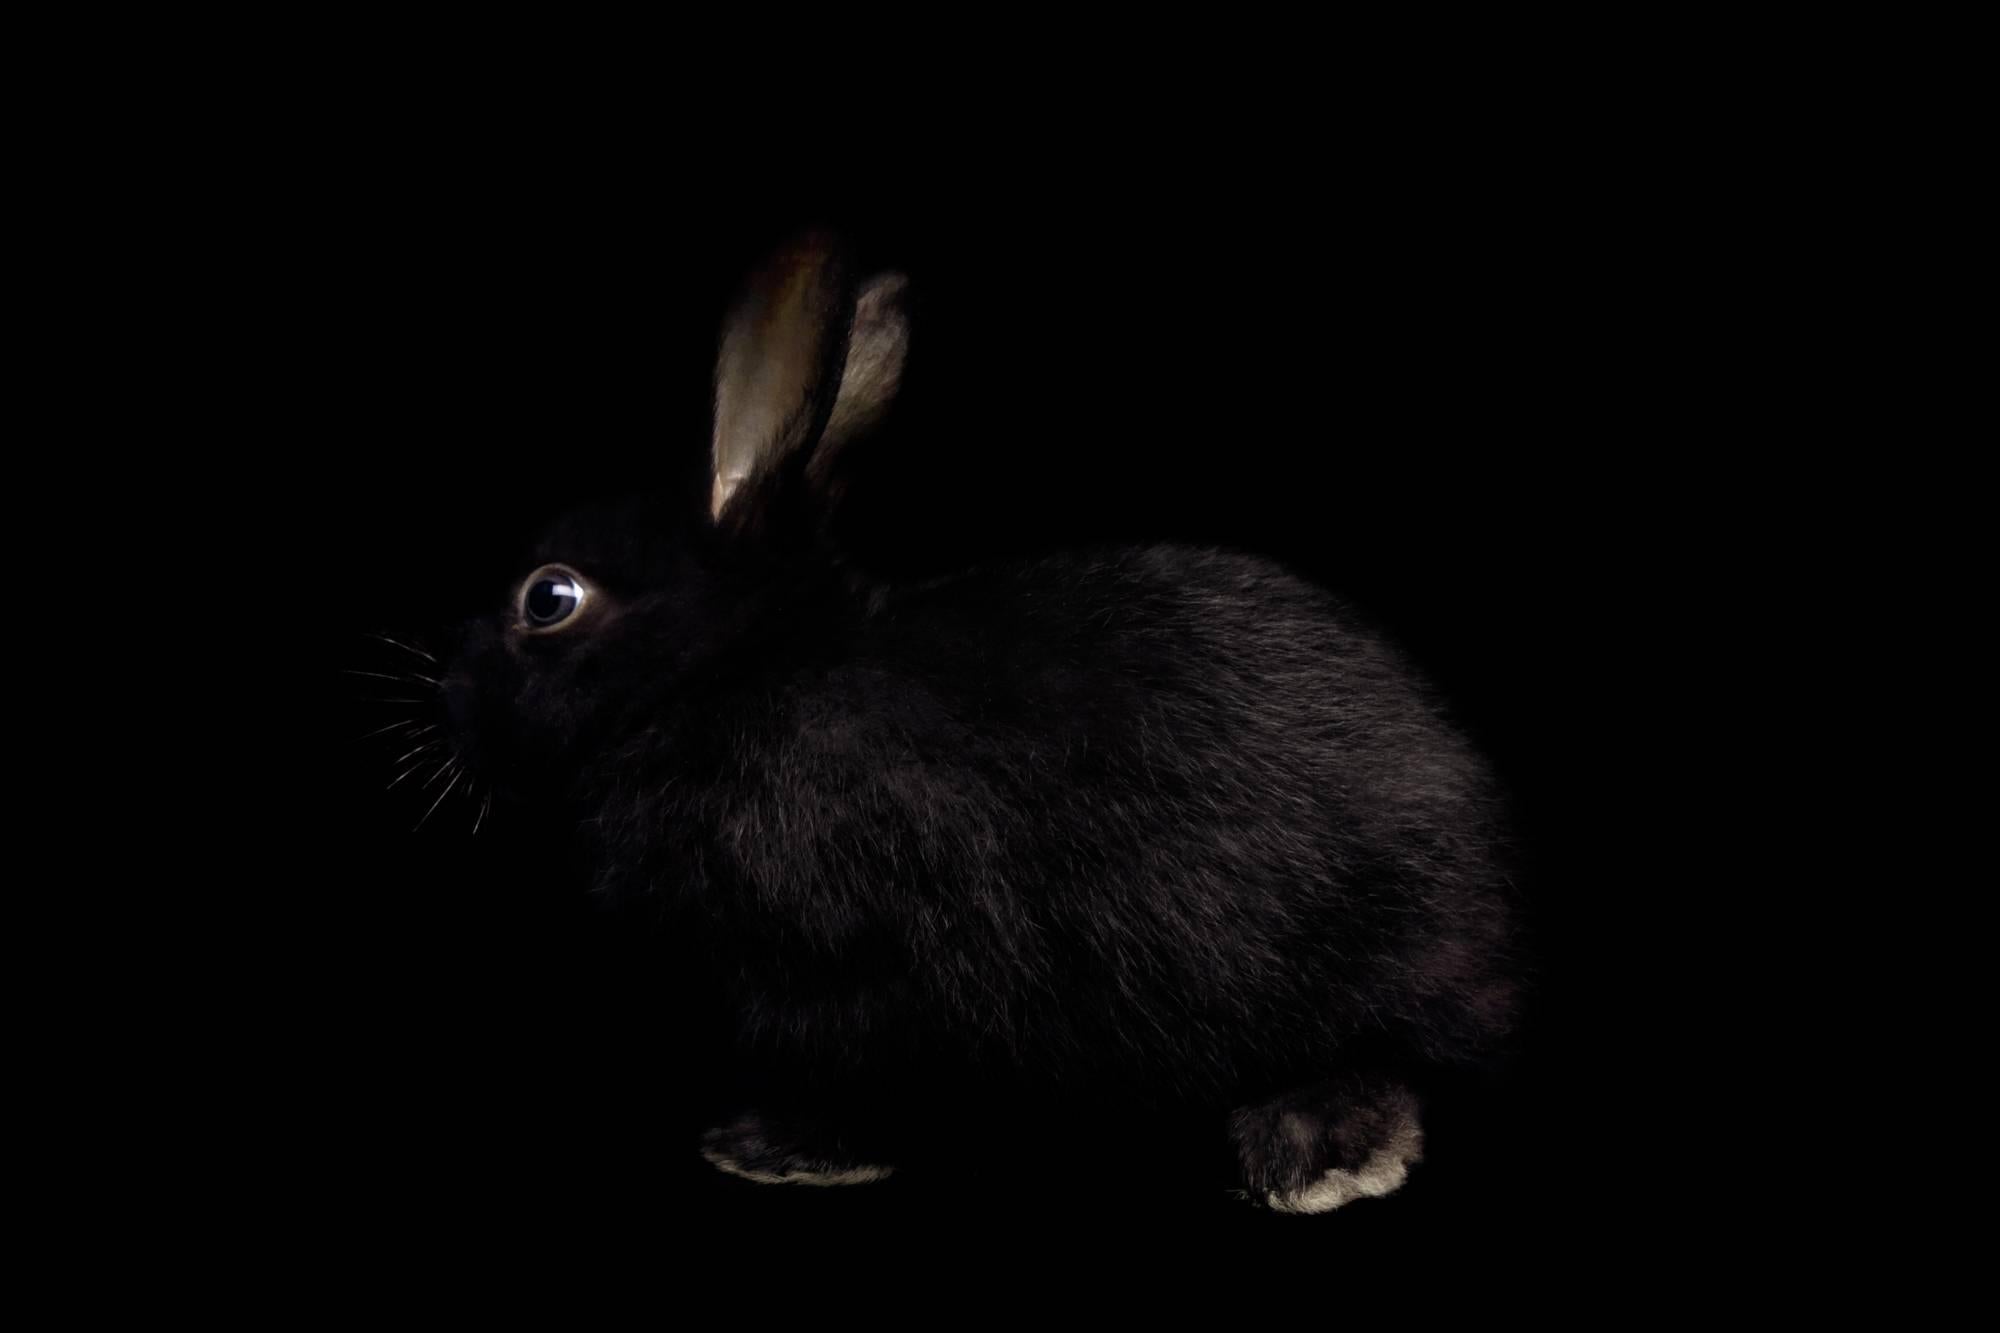 Netta Laufer Black and White Photograph - Rabbit - from the Black Beauty series